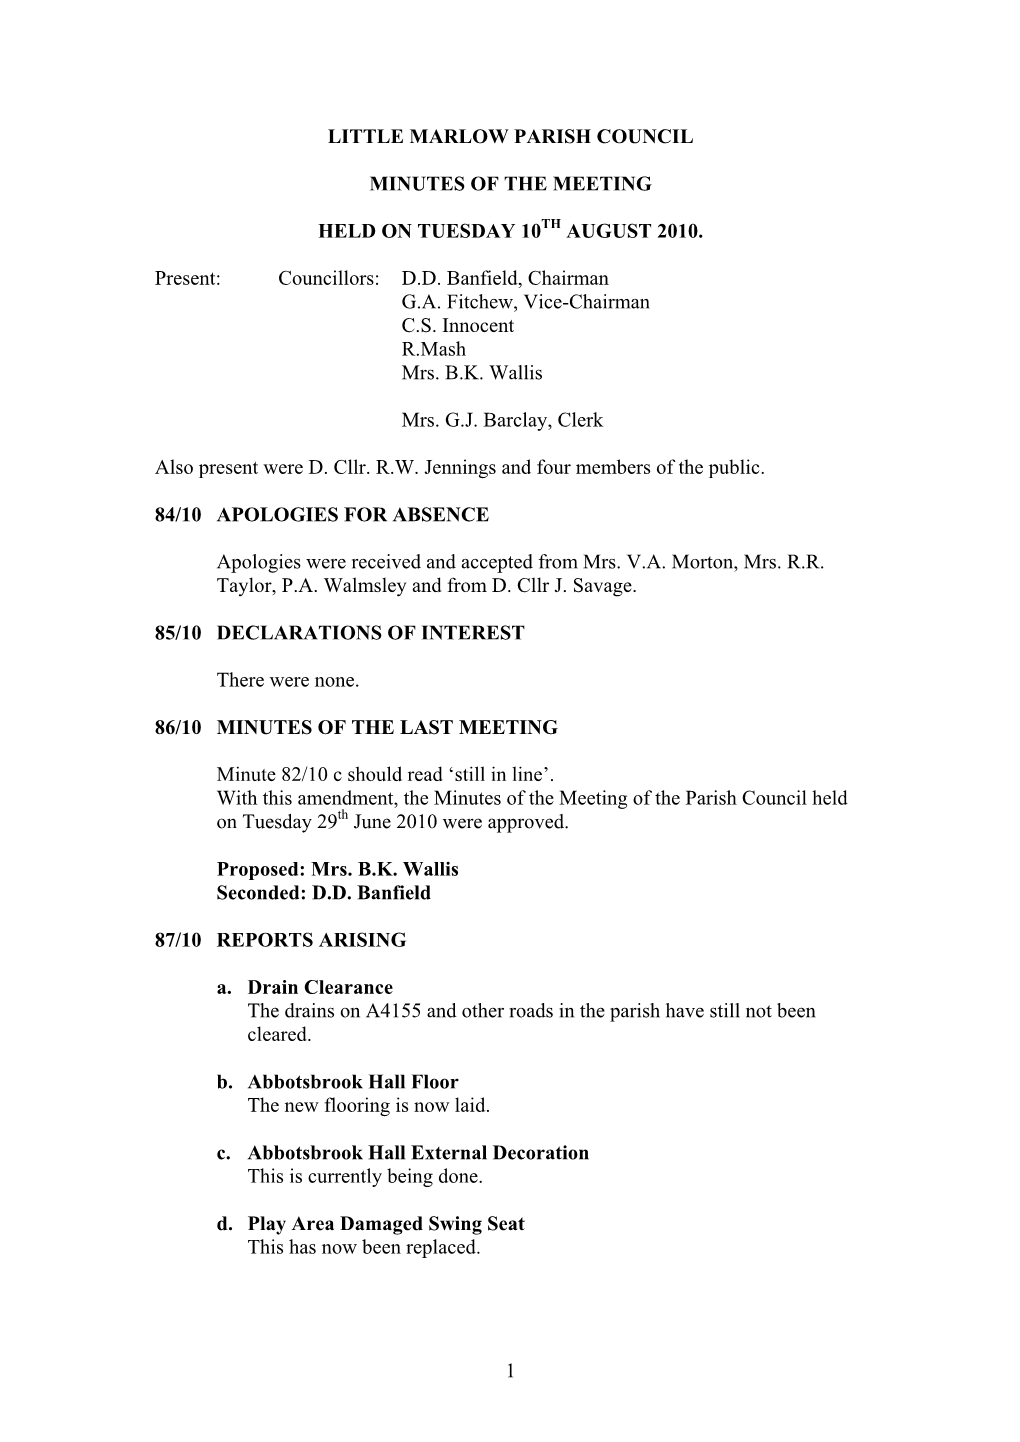 1 Little Marlow Parish Council Minutes of The